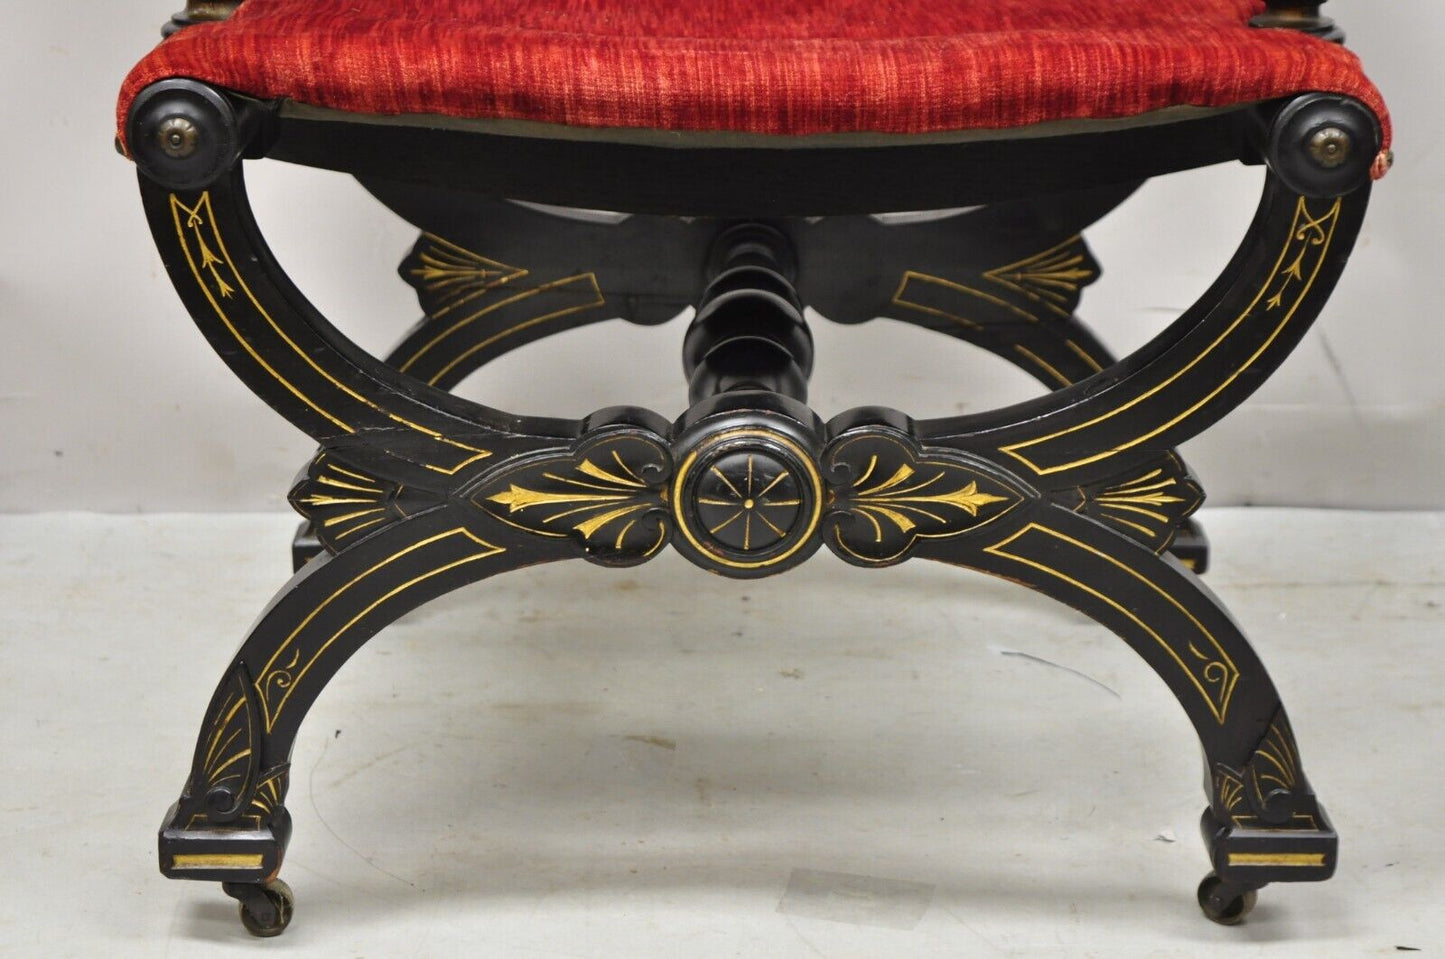 Antique Victorian Aesthetic Movement Ebonized Curule Throne Arm Chair with Lions